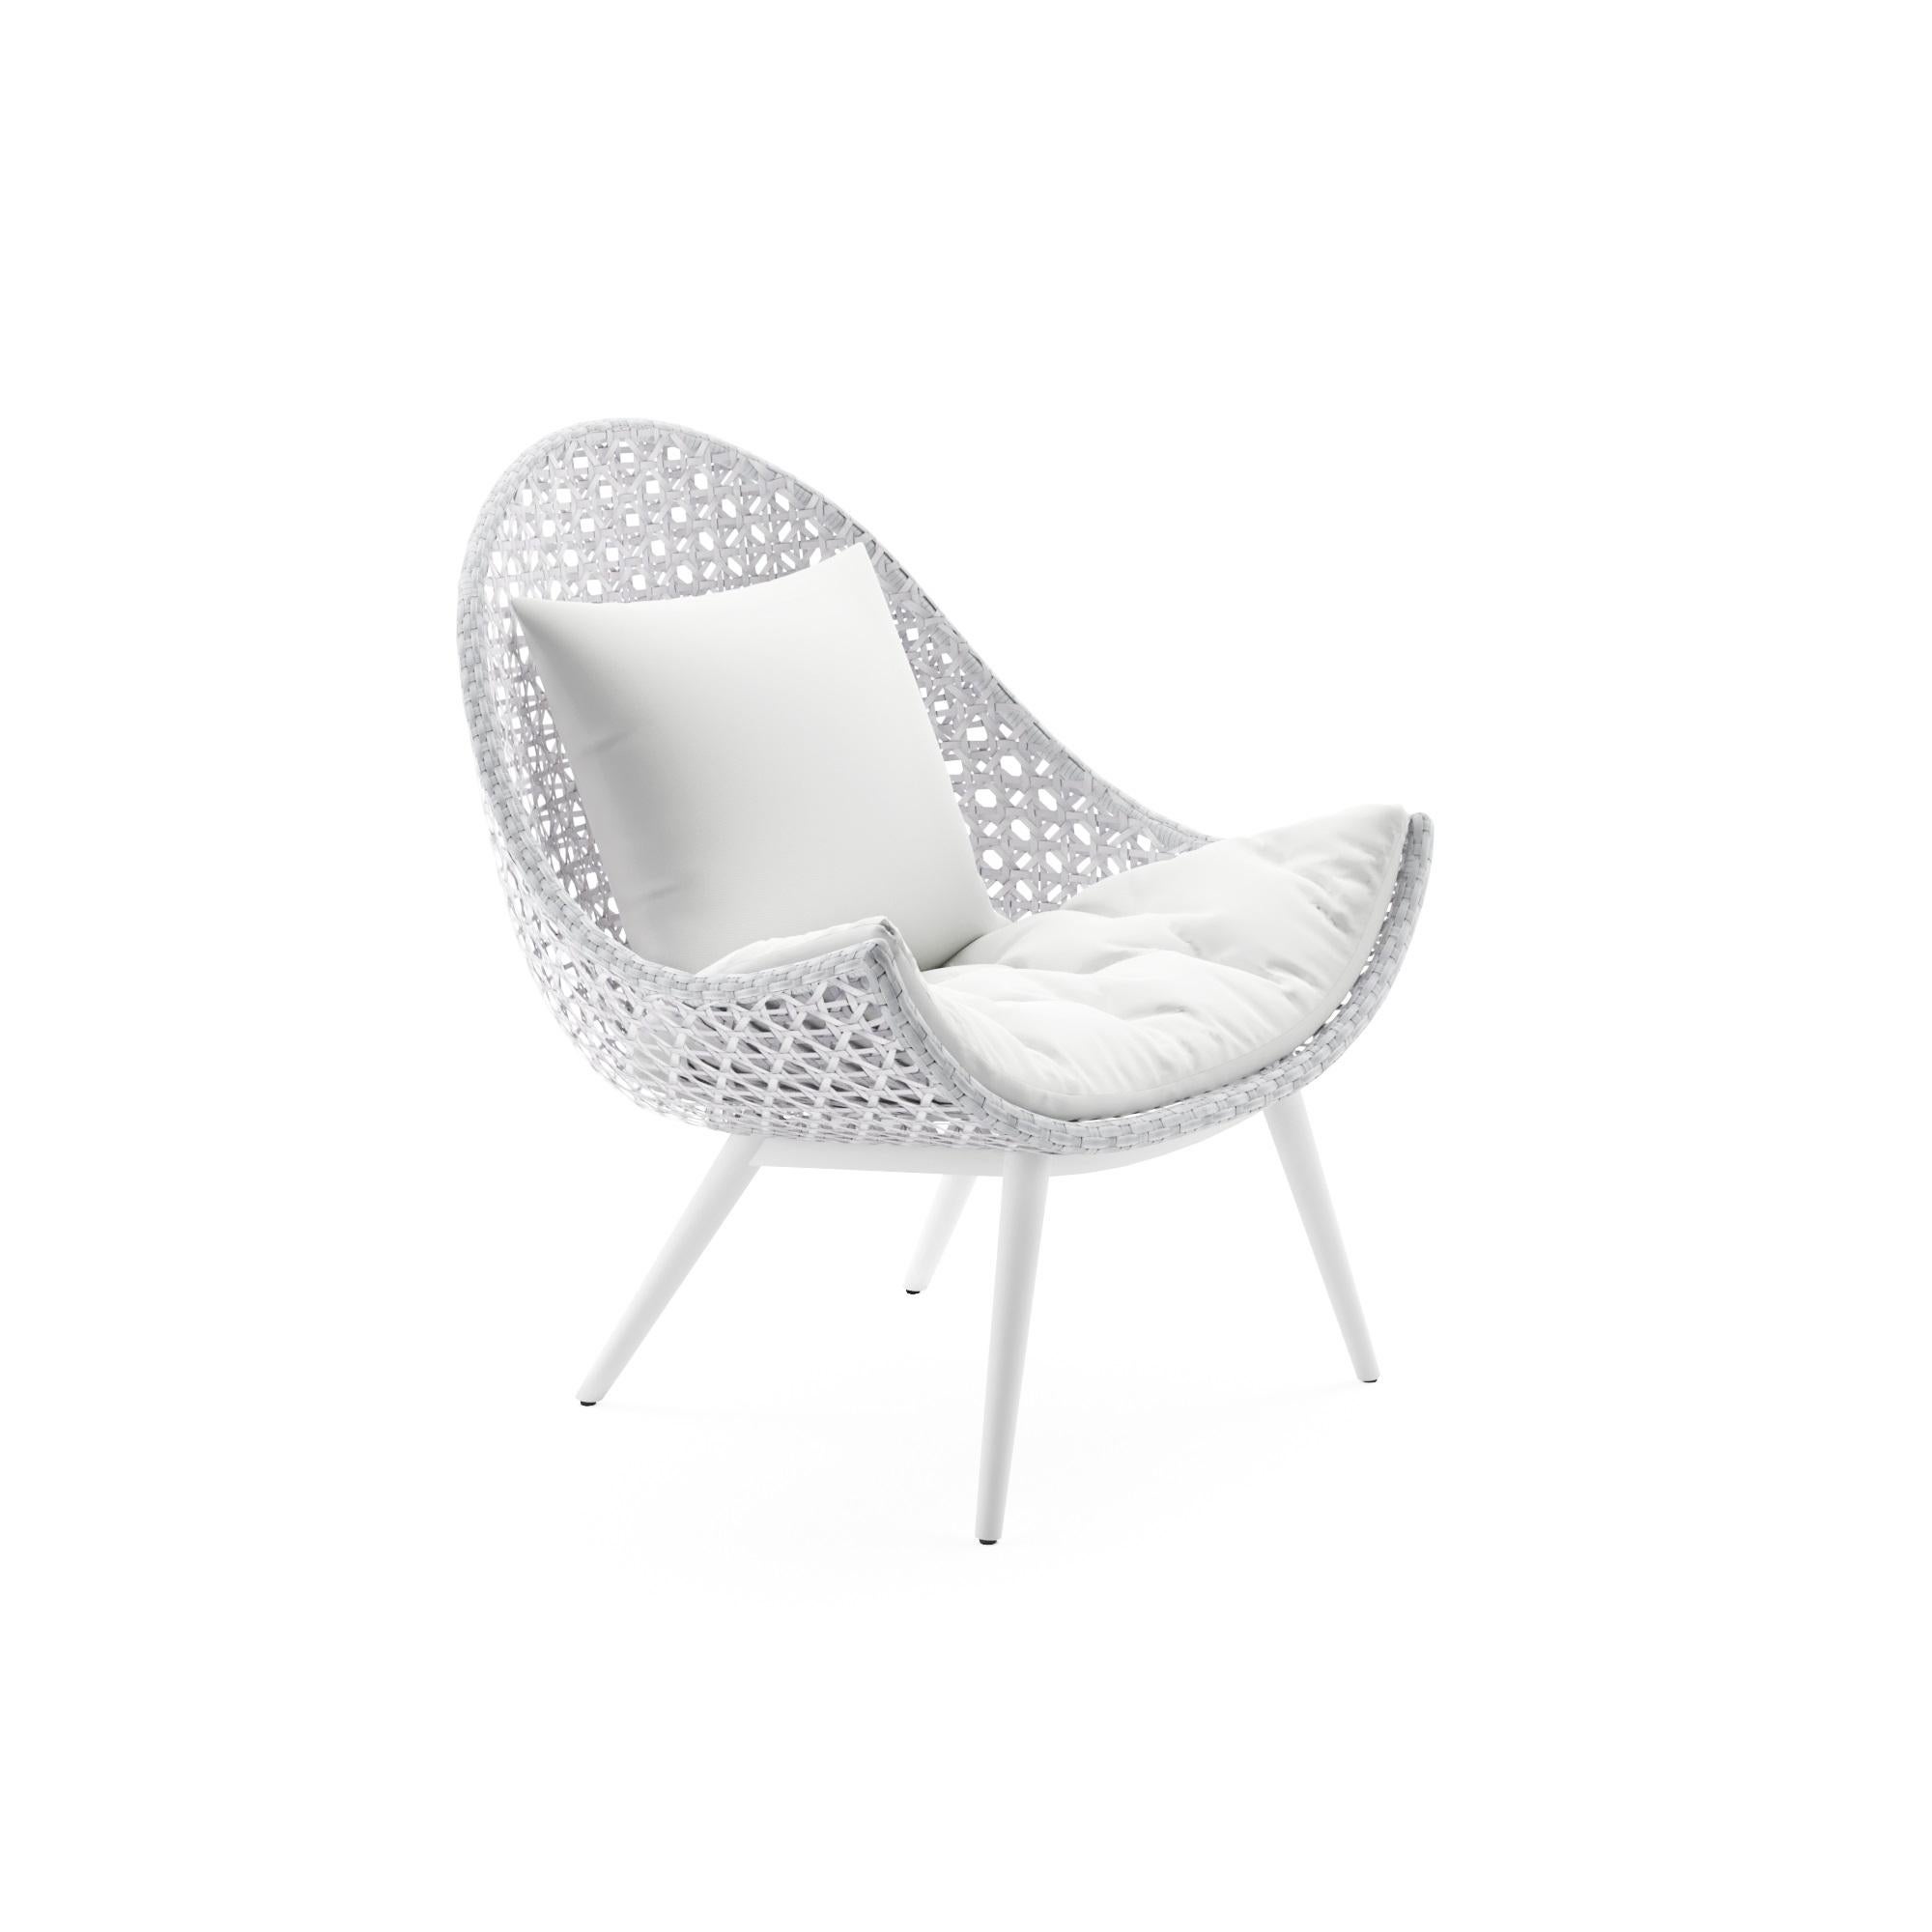 This chair is modern weaving personified. The combined use of two different colors and the open weave technique creates the unique design of this collection. Thanks to its round design and comfortable and washable seat cushions, this lounge chair